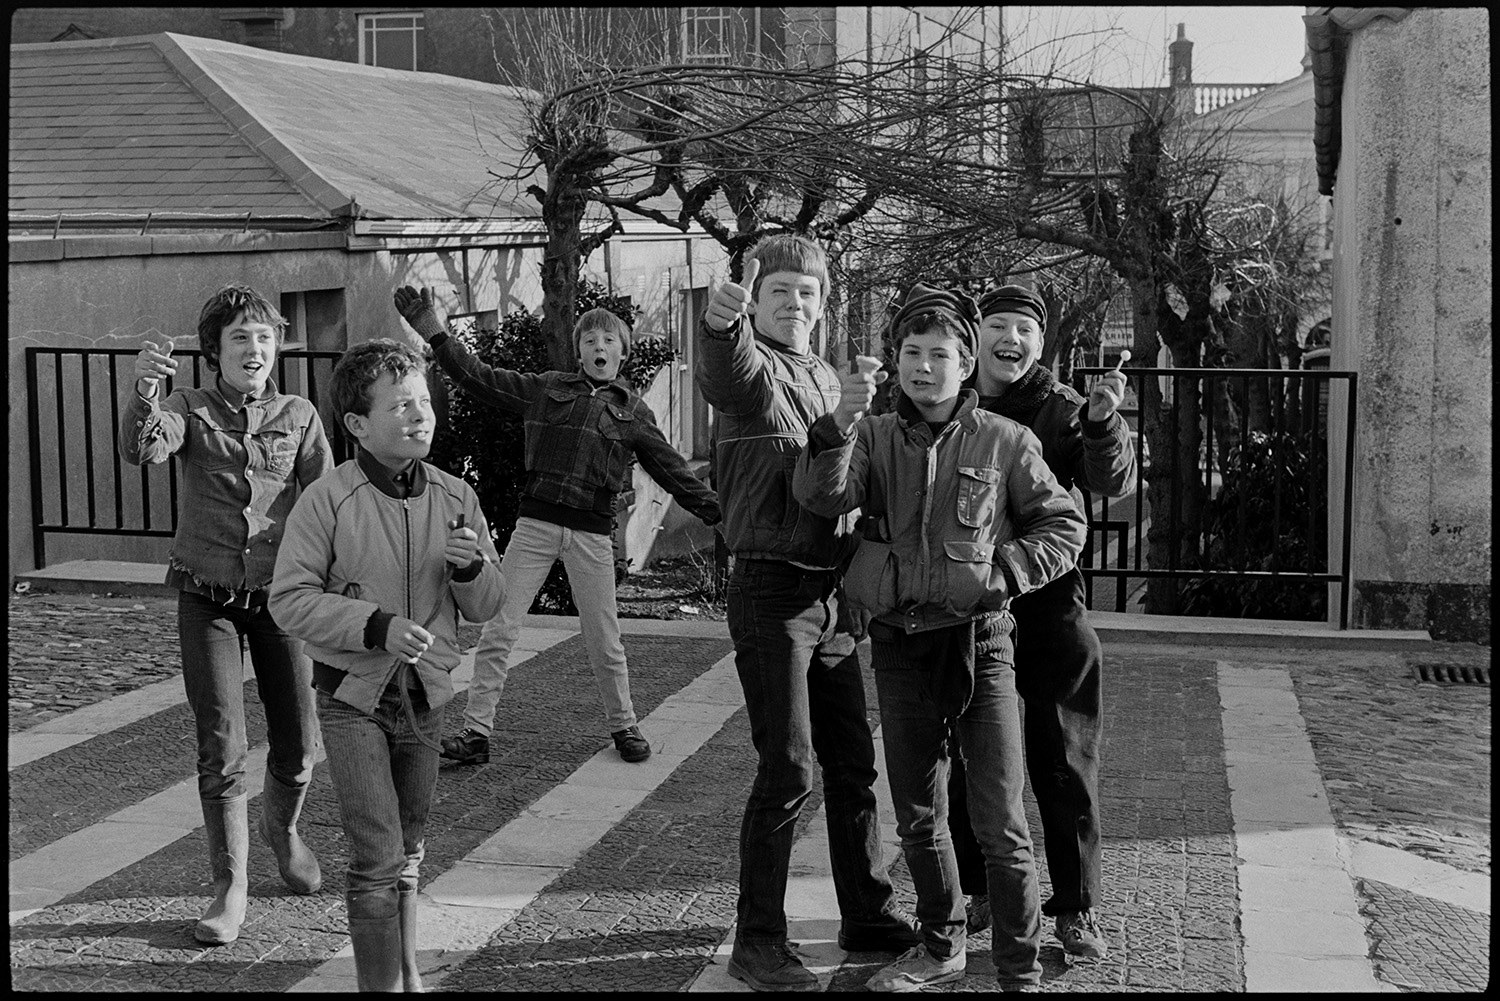 Young boys in churchyard larking in front of camera. 
[A group of six boys waving at the camera on the paved area at the entrance to South Molton churchyard. The avenue of lime trees leading to the churchyard can be seen in the background. Two of the boys are holding an ice cream and a lollipop.]